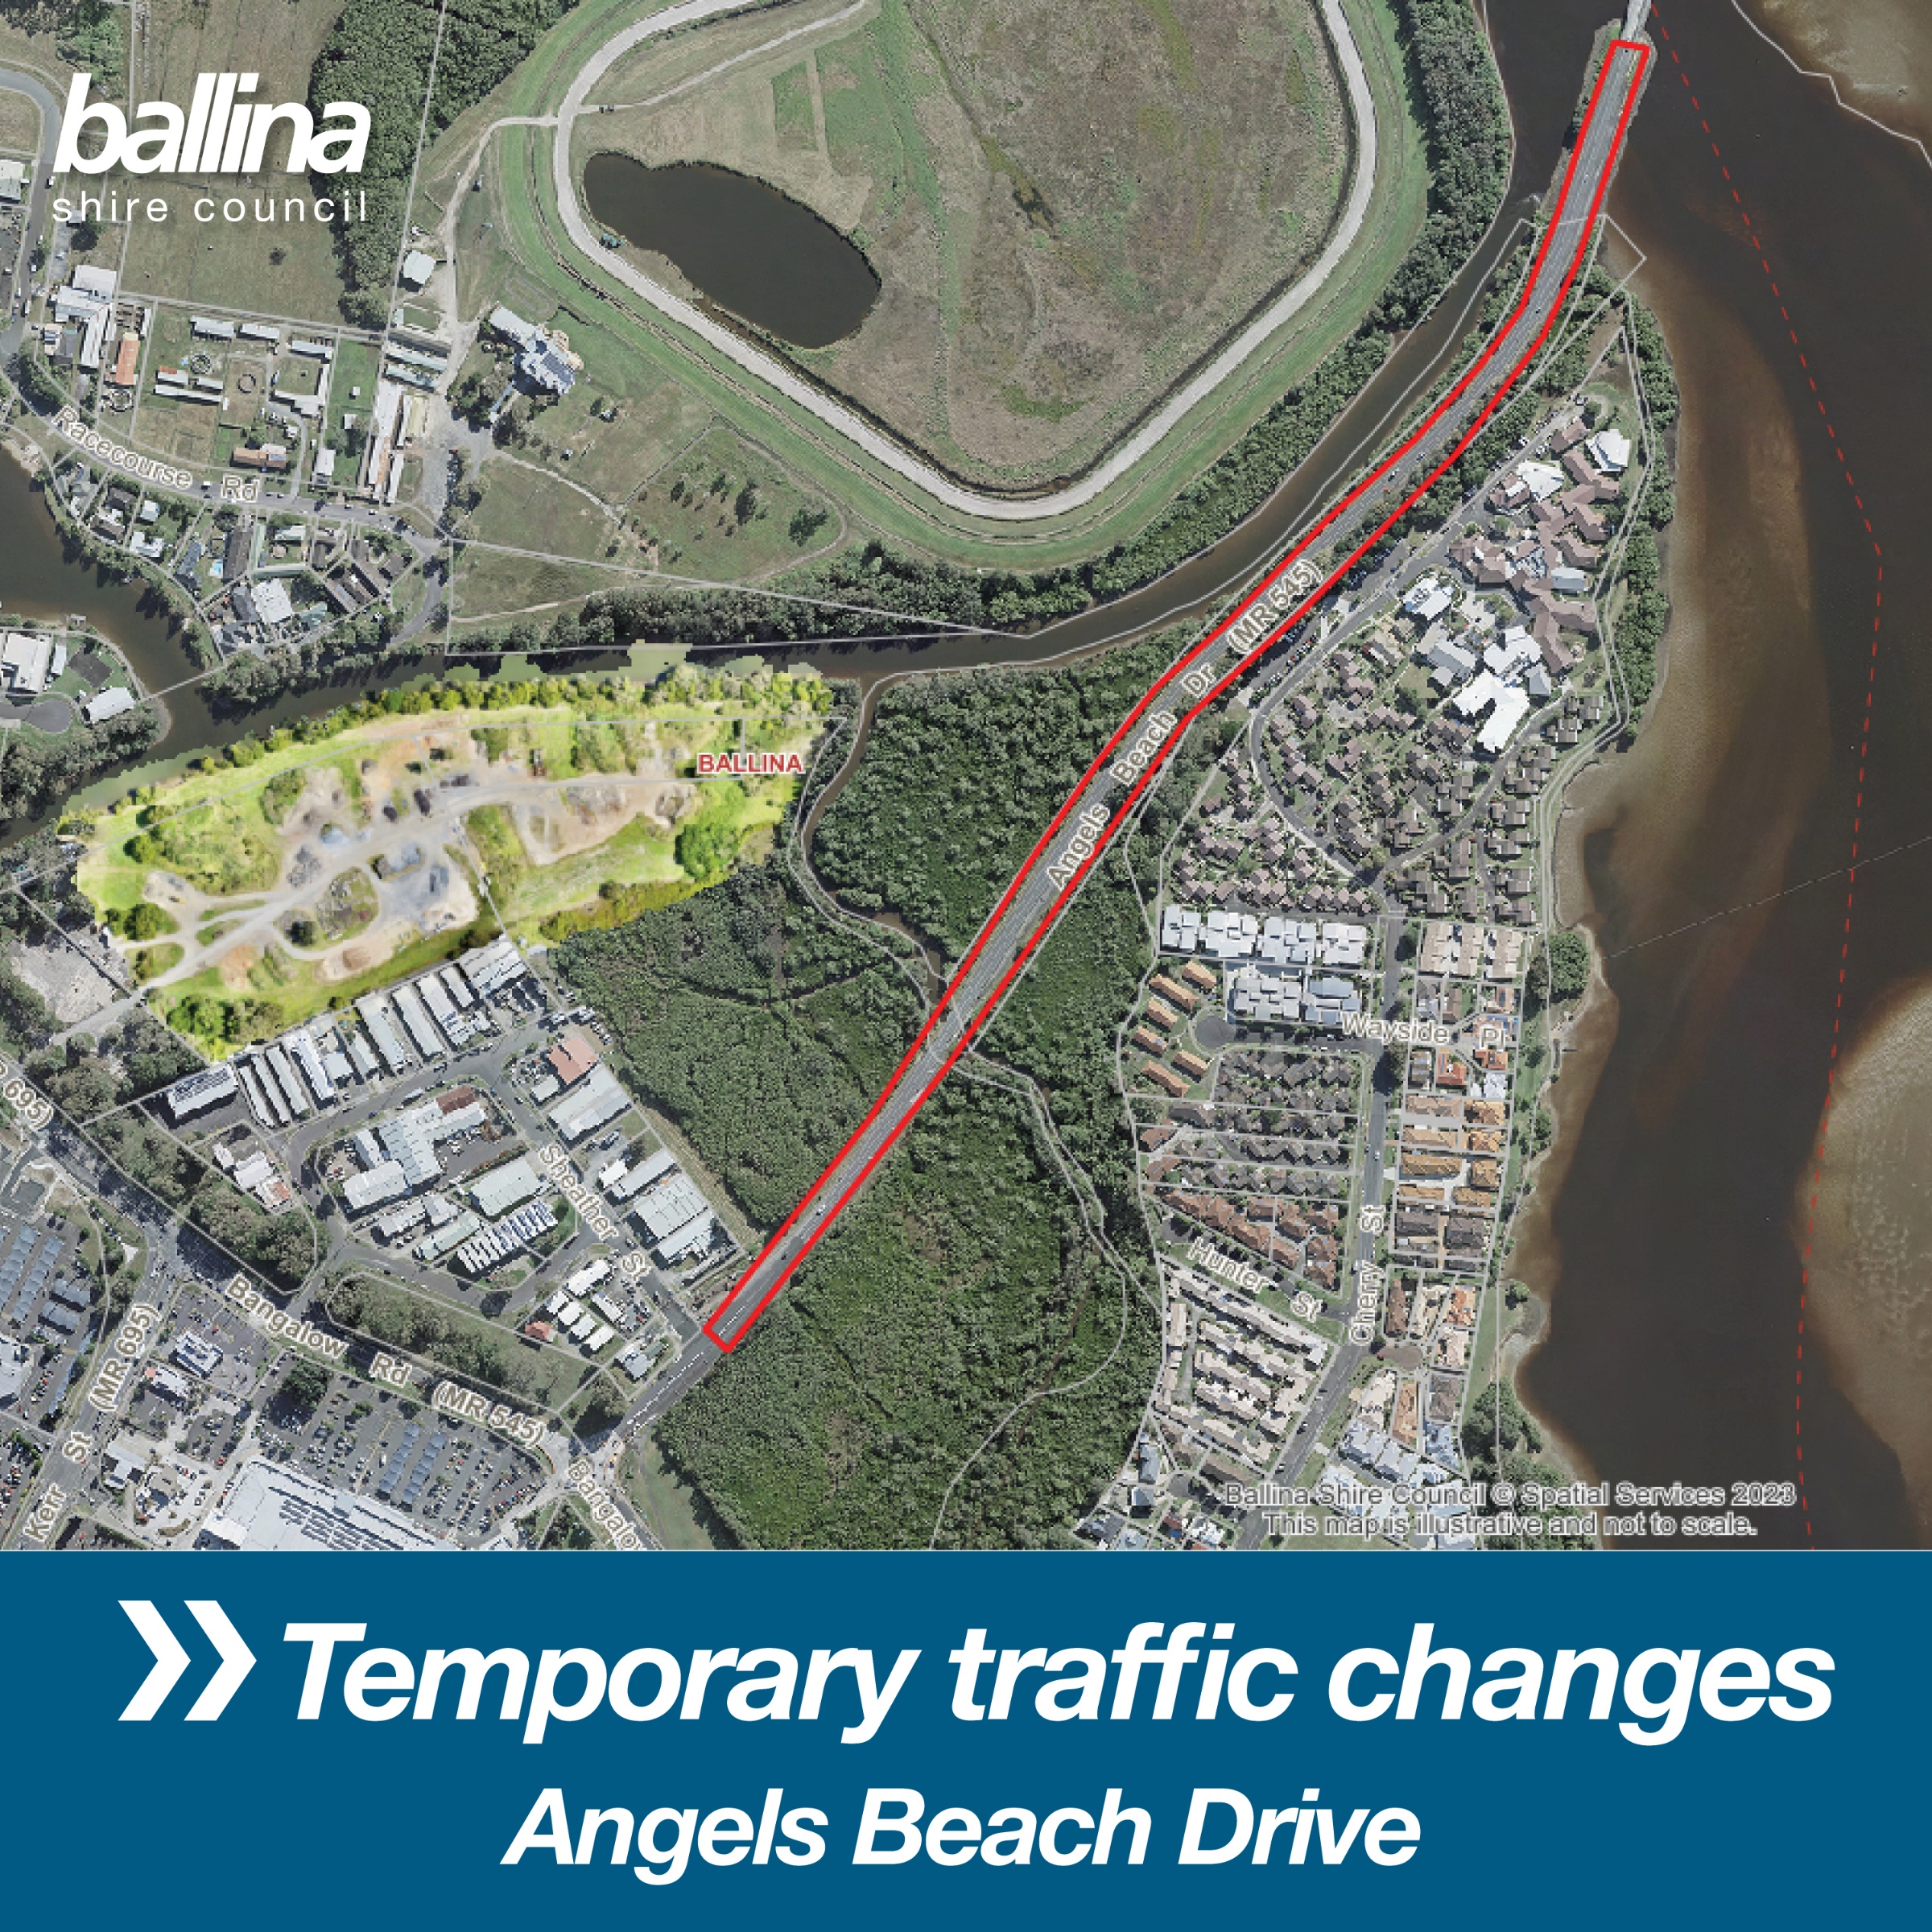 Temporary traffic changes for Angels Beach Drive